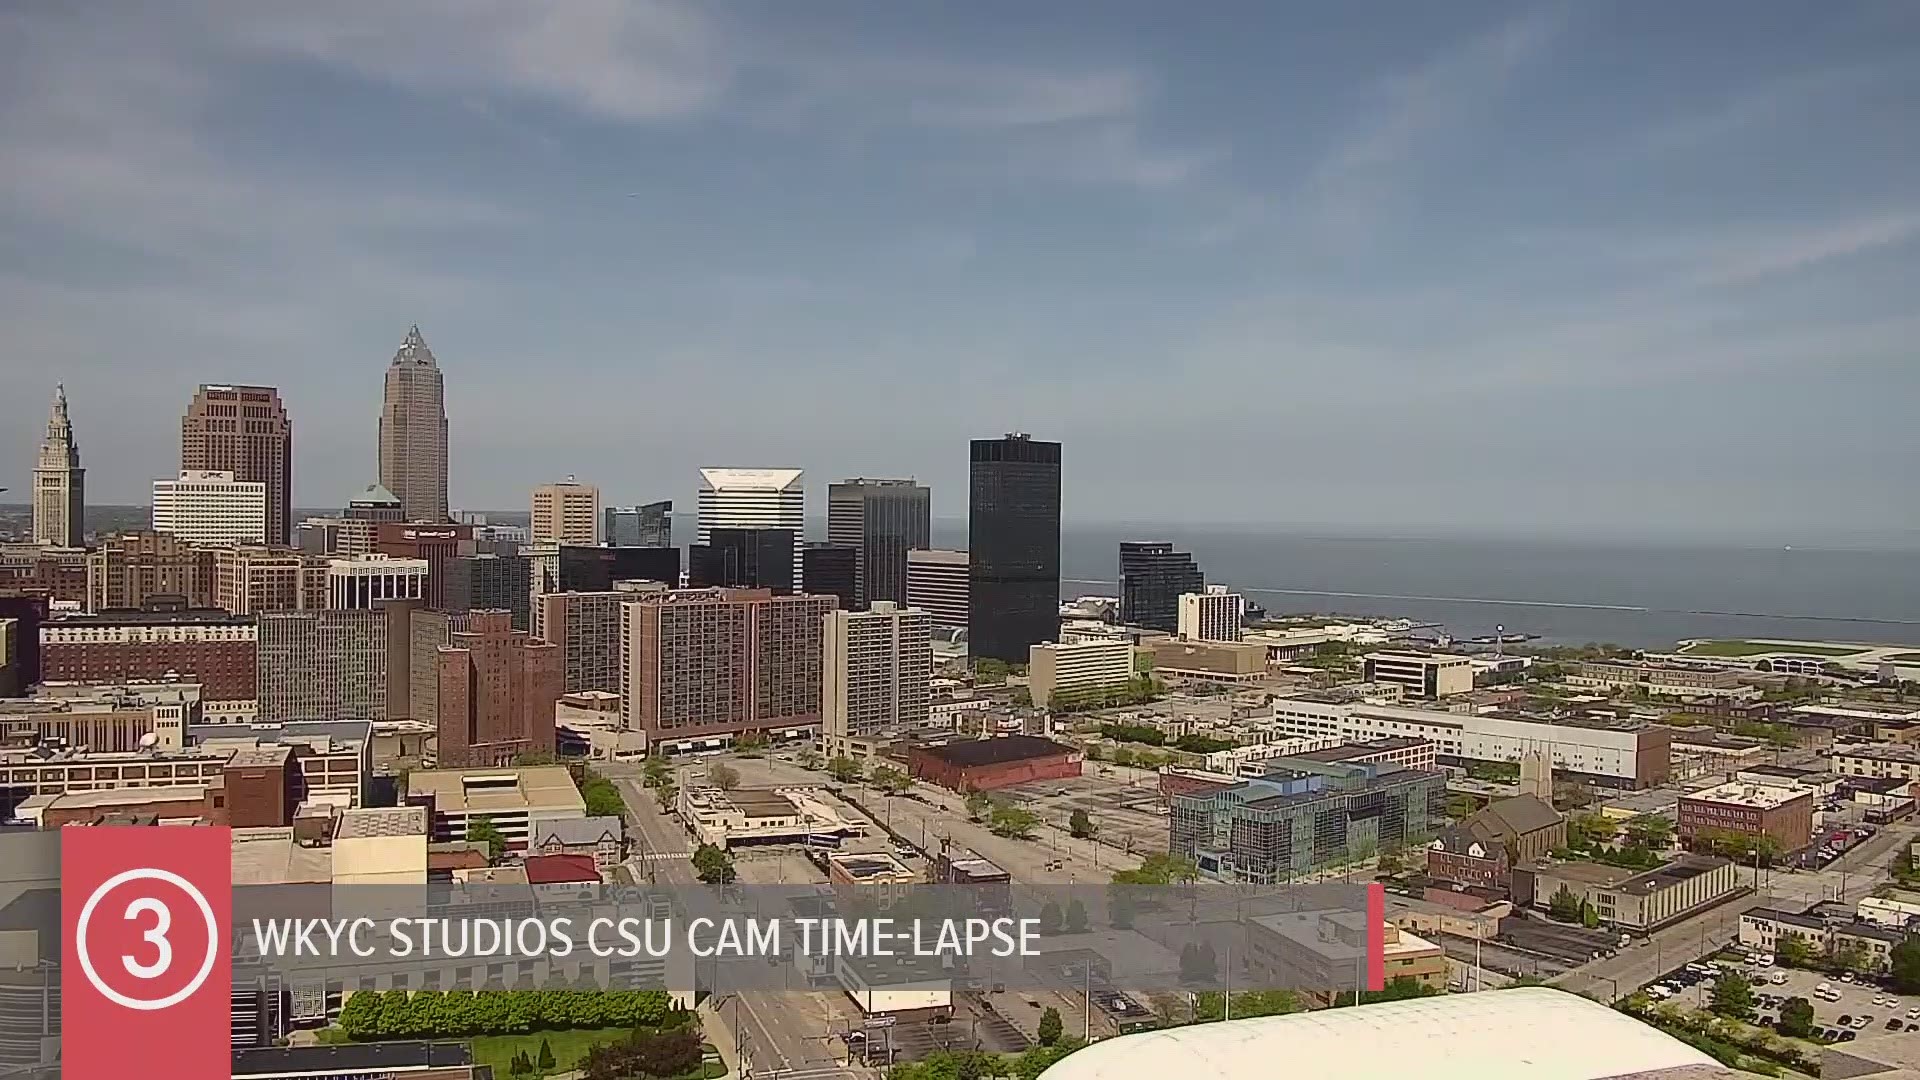 Sunny skies are giving way to an increase in clouds this afternoon. Check out our WKYC Studios CSU Cam weather time-lapse on Sunday. #3weather @wkyc #wx